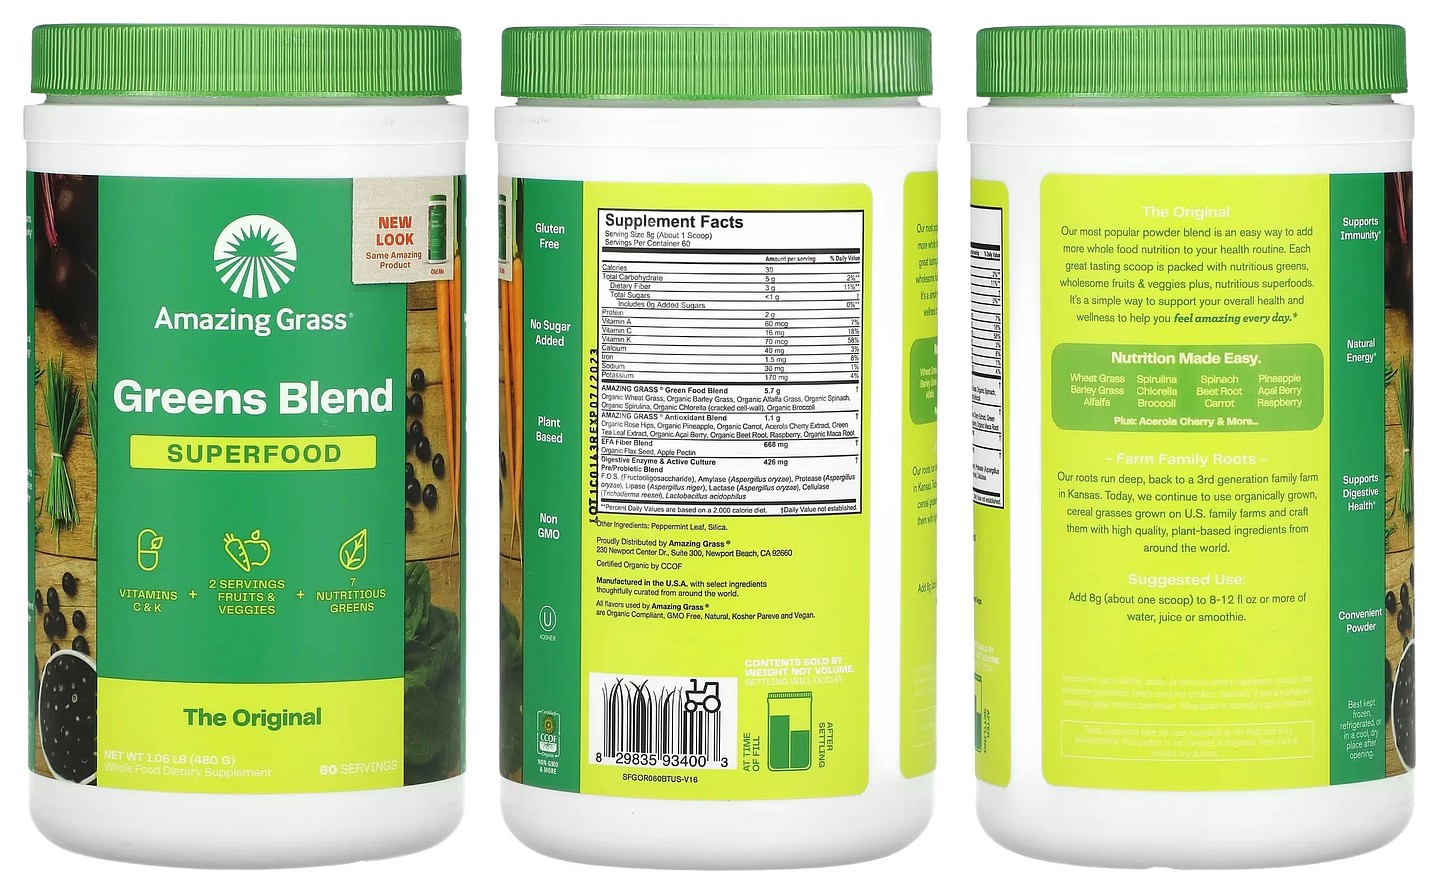 Amazing Grass, Greens Blend Superfood, The Original packaging